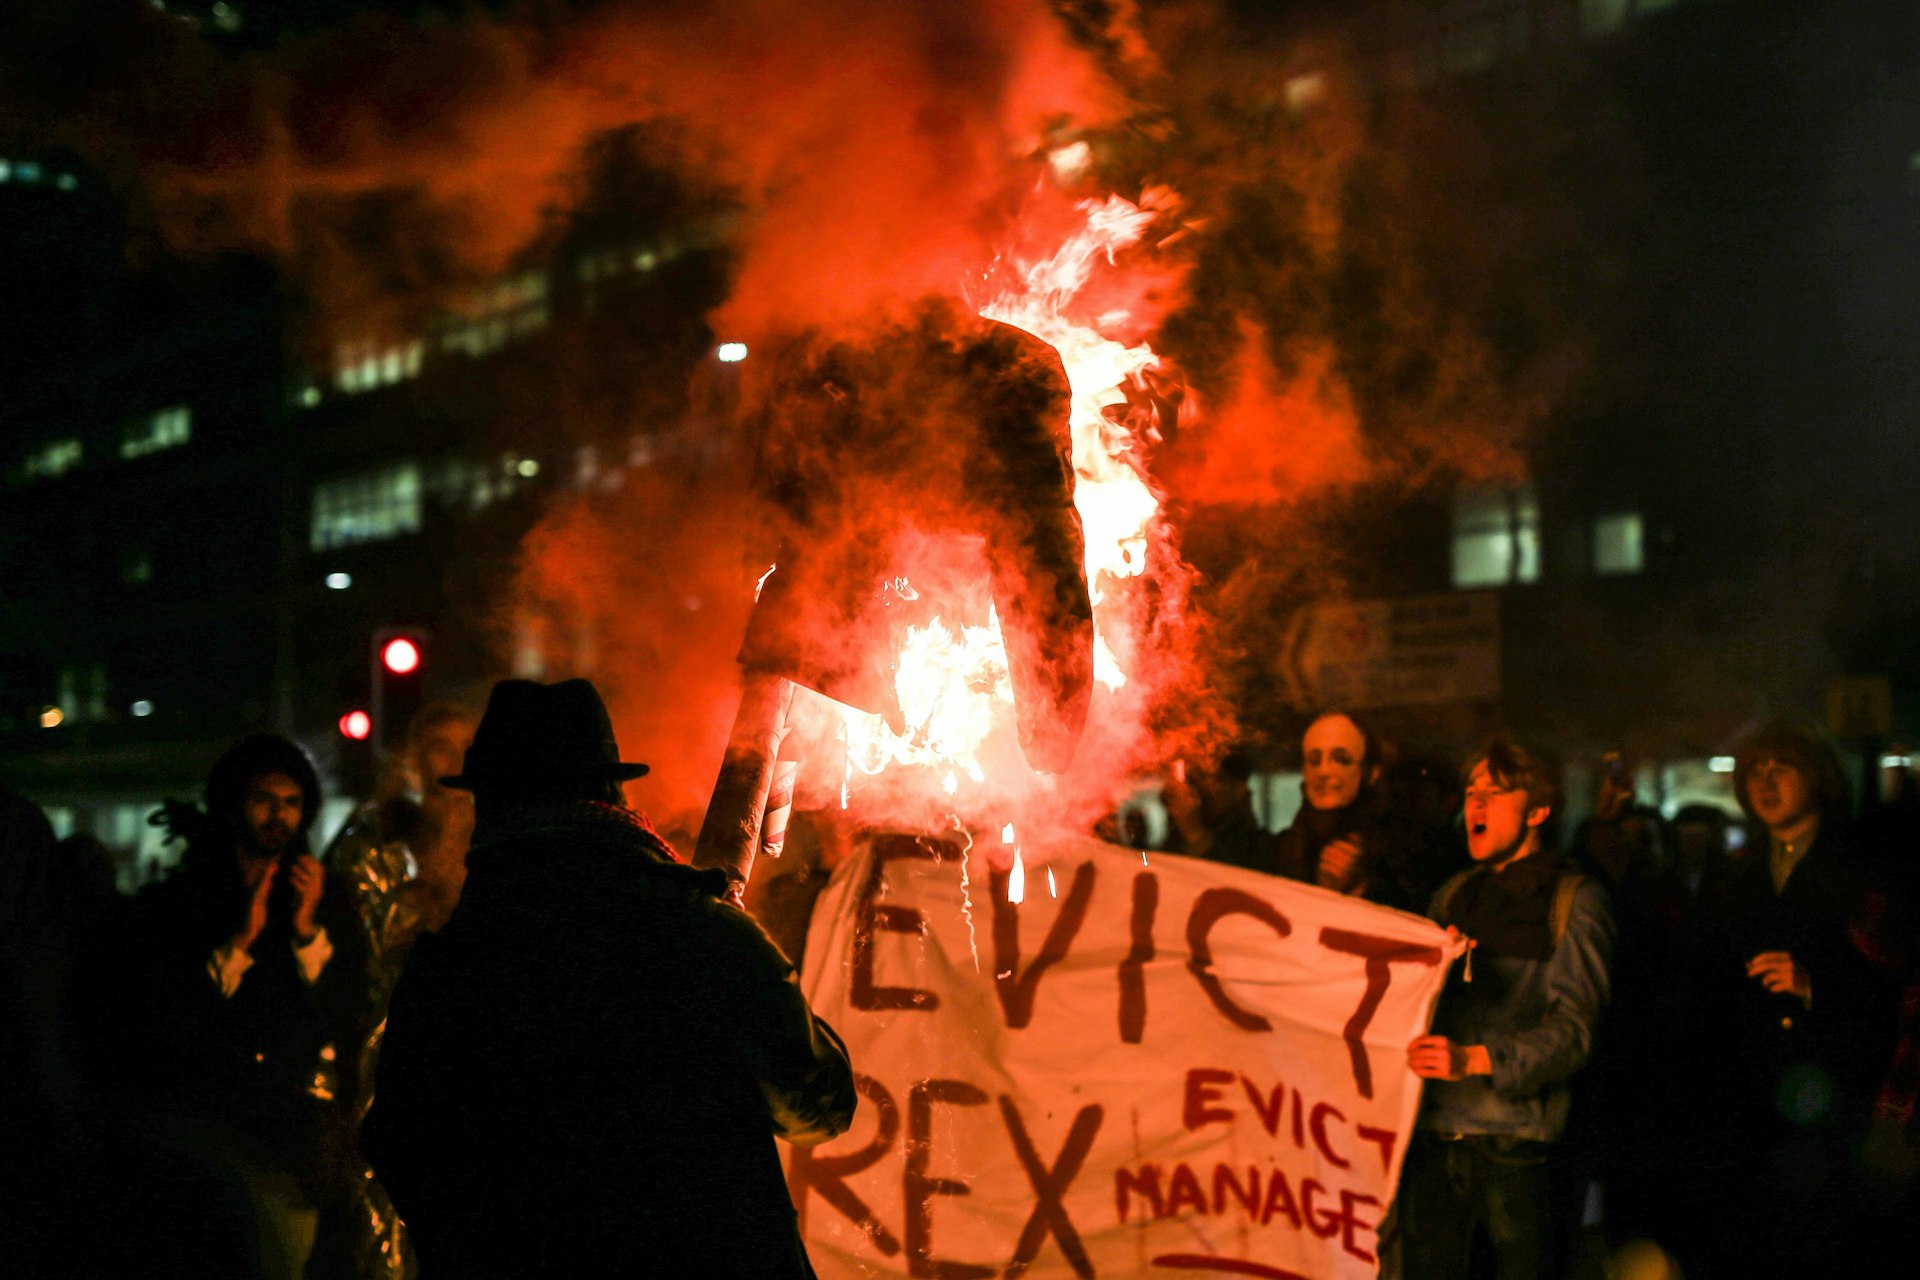 Pissed off London students protested high rents last night